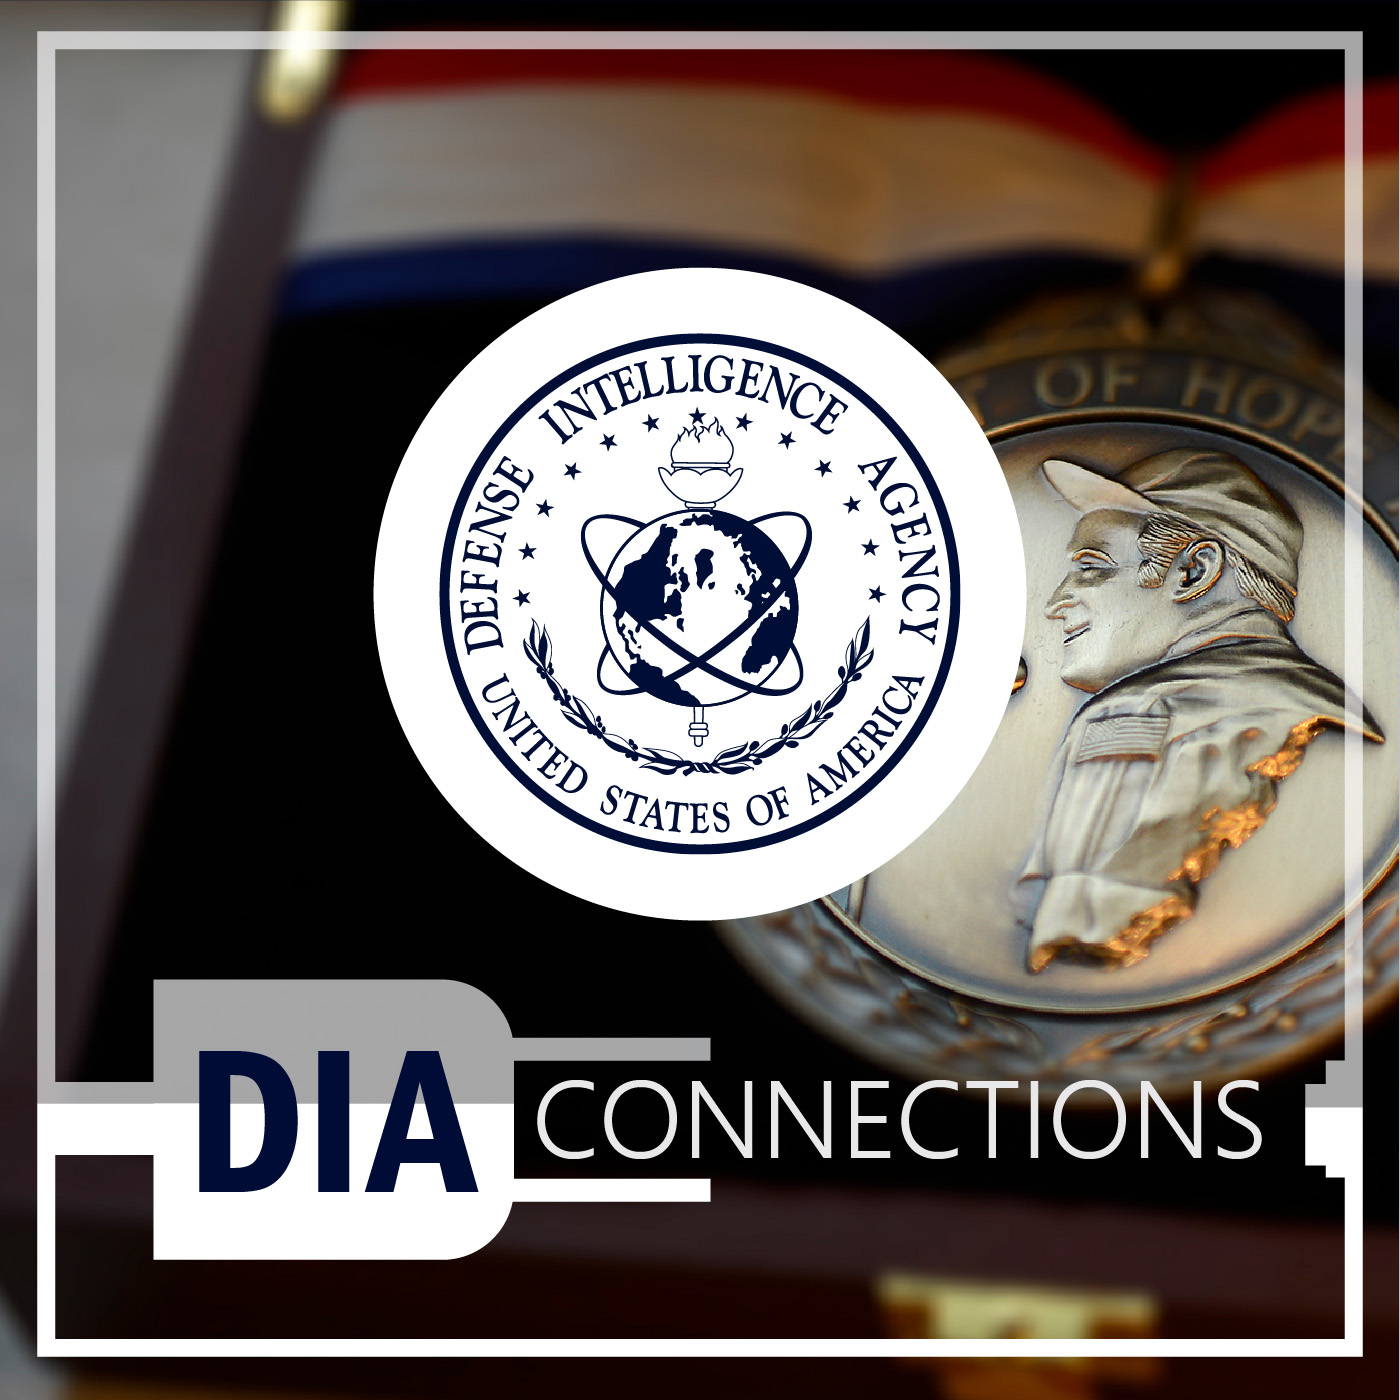 Image of a medal with D-I-A Seal and title. D-I-A Connections.